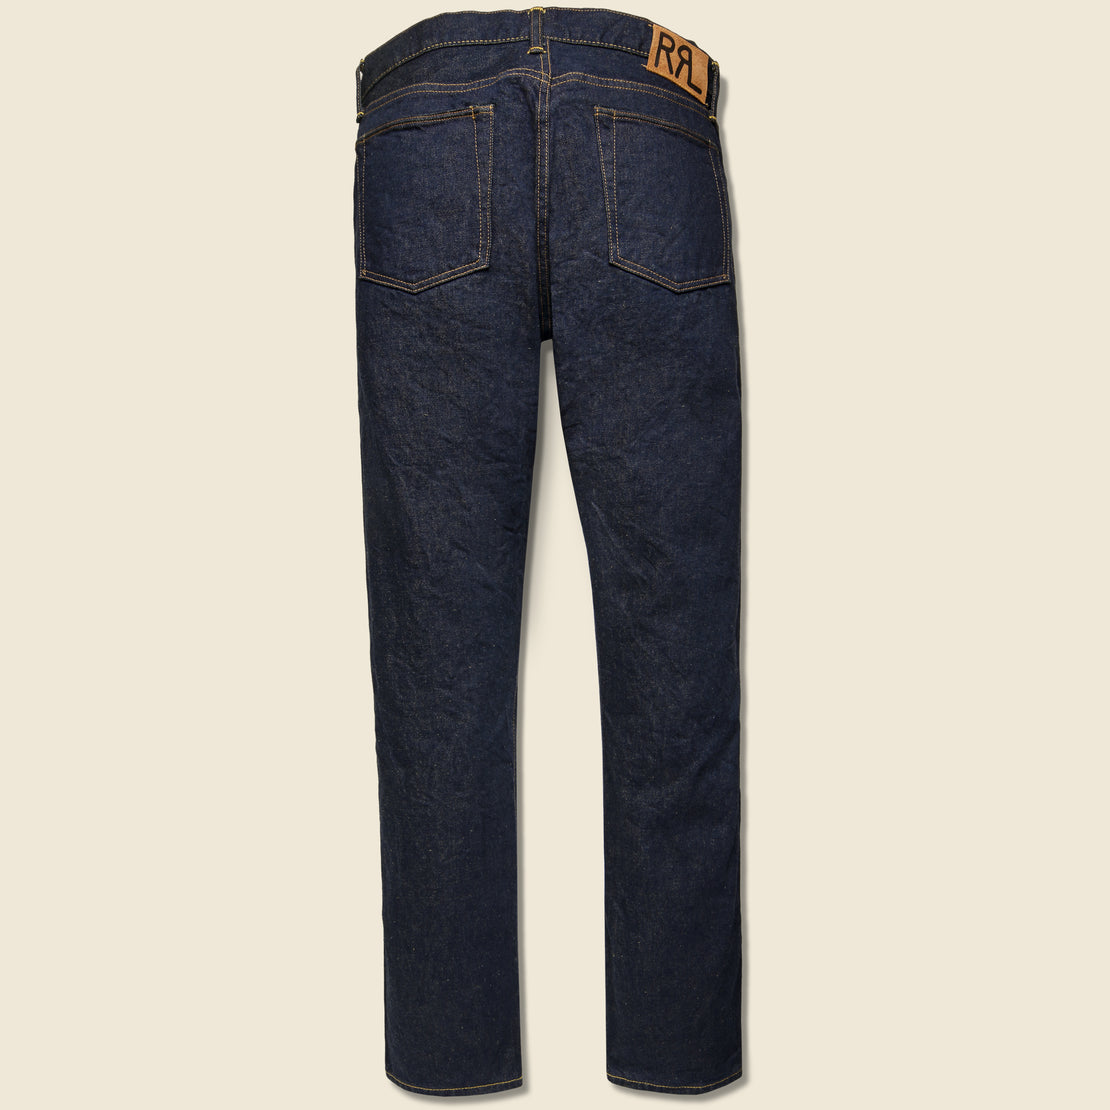 Slim Fit Jean - Once Washed - RRL - STAG Provisions - Pants - Denim